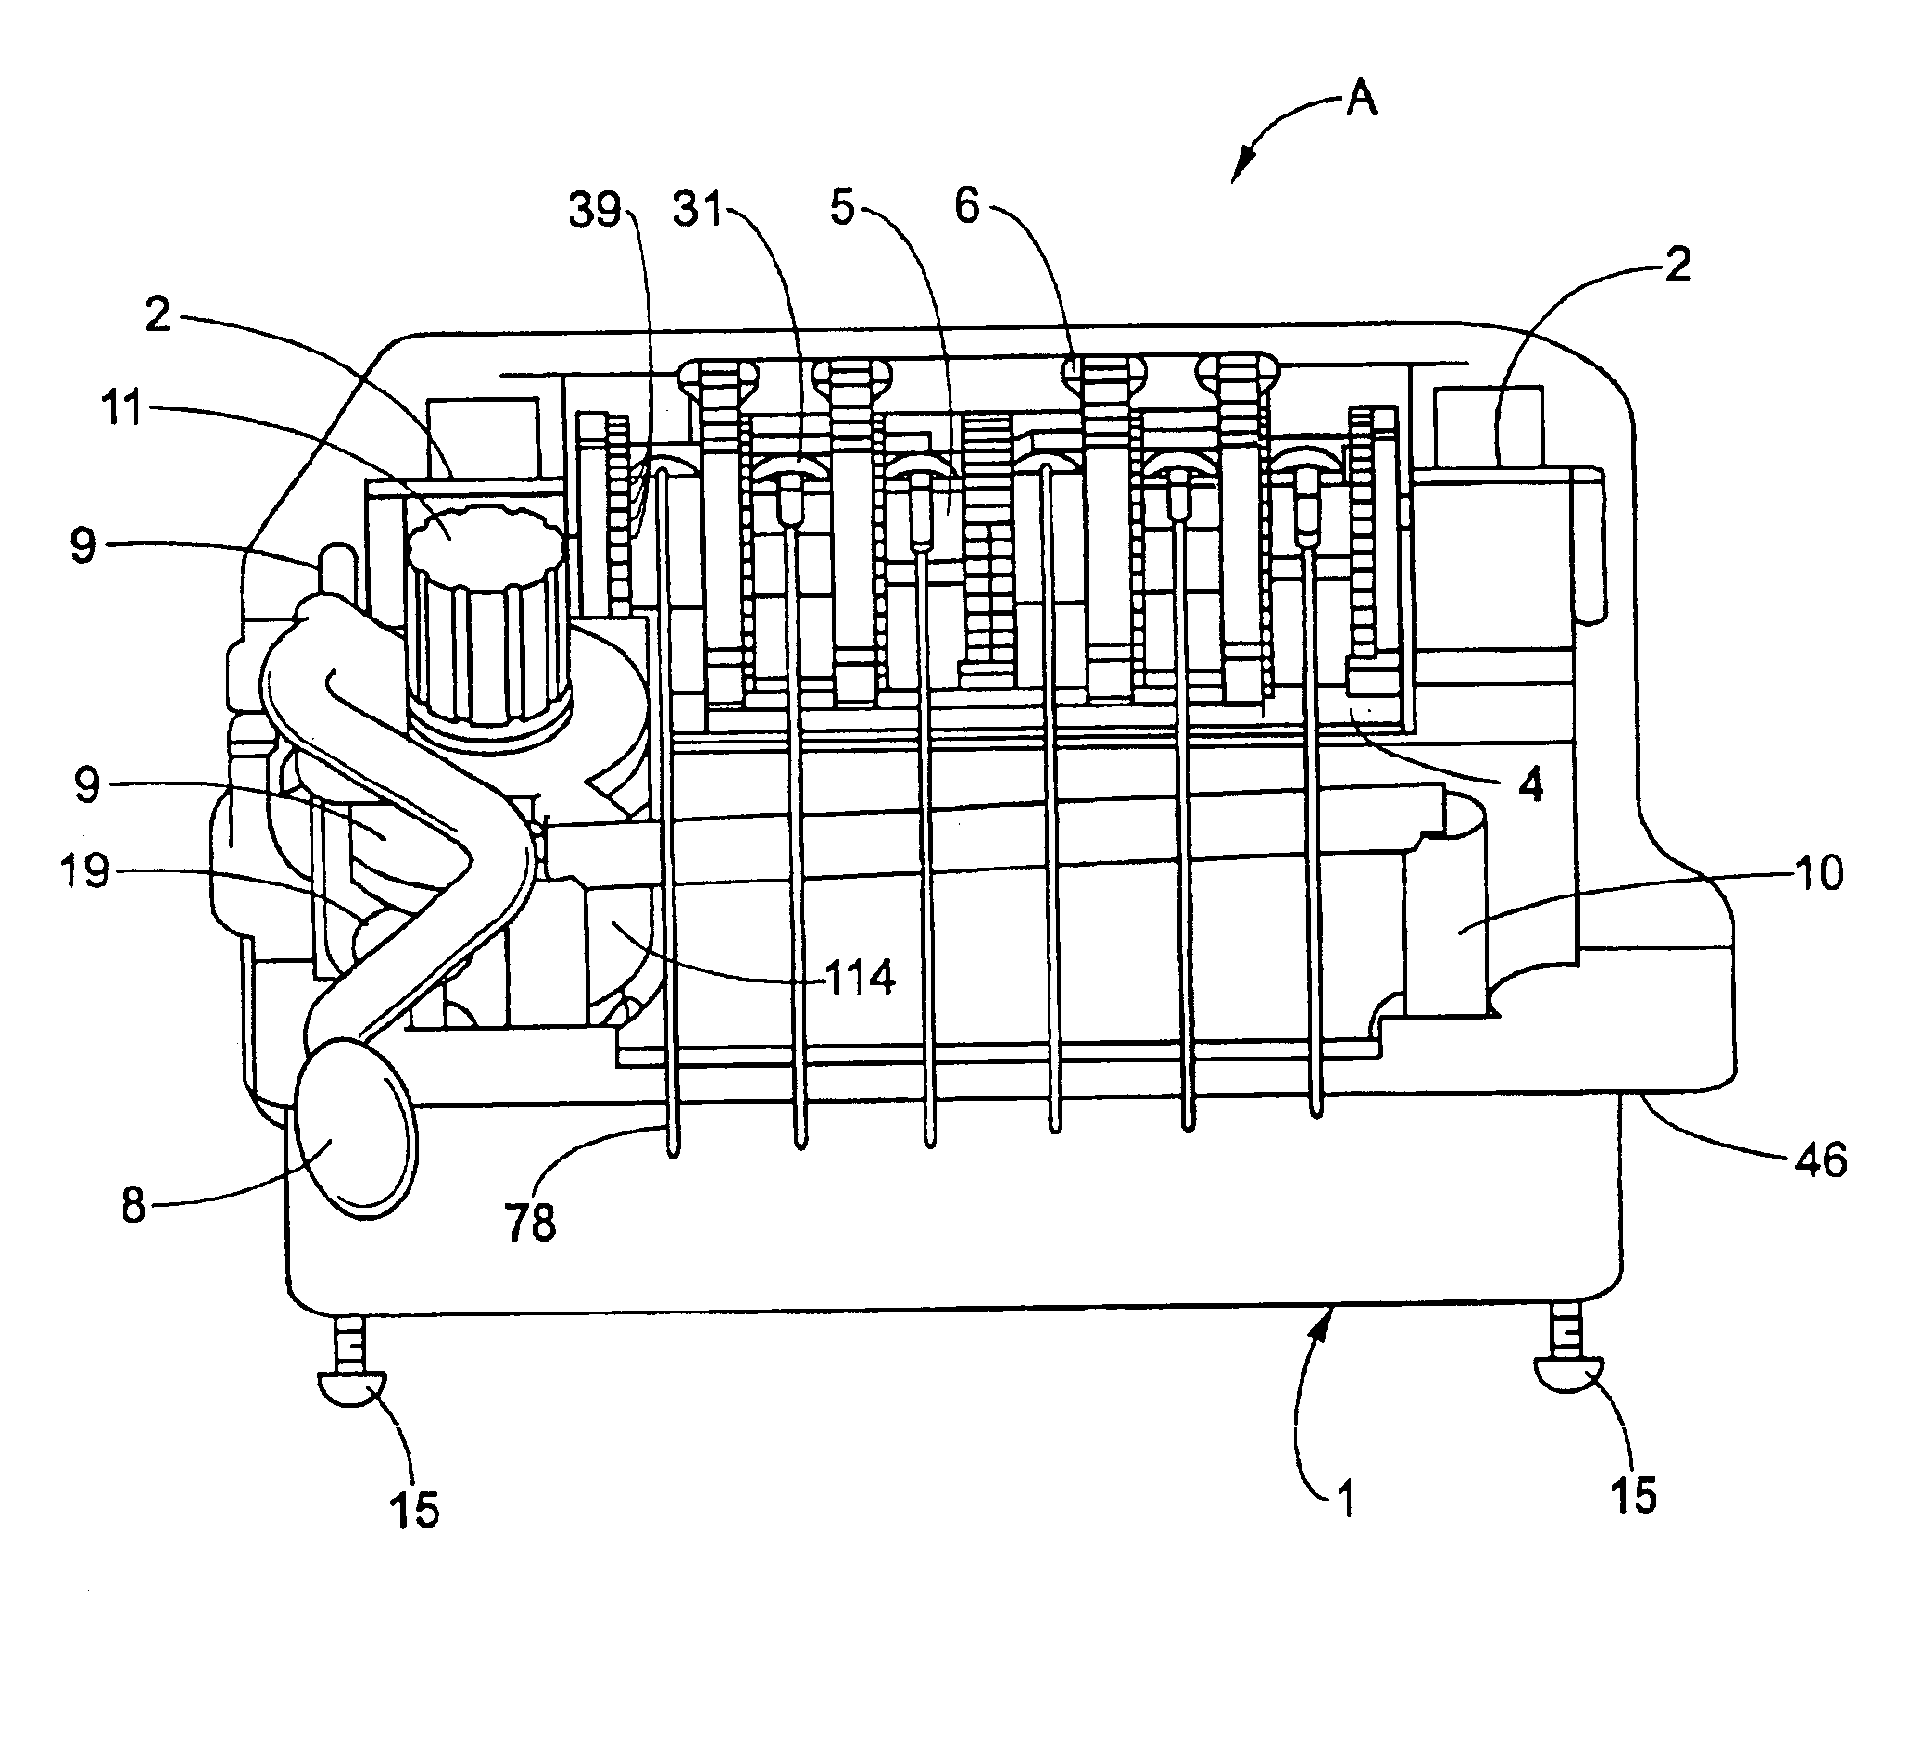 Tremolo device for a stringed musical instrument